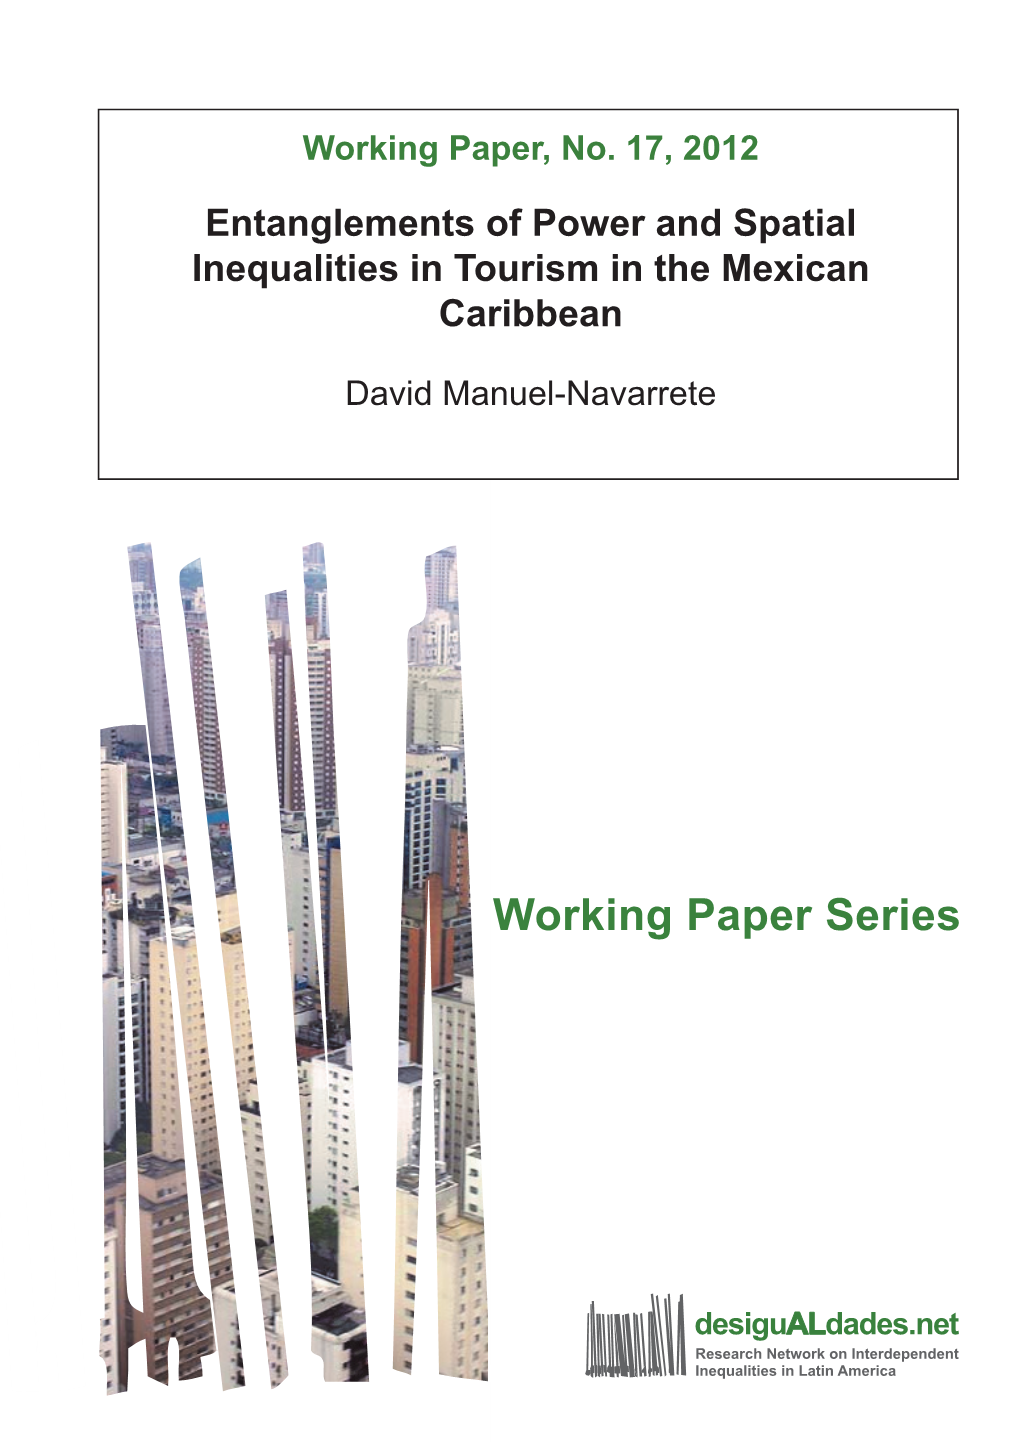 Manuel-Navarrete, David 2012: “Entanglements of Power and Spatial Inequalities in Tourism in the Mexican Caribbean”, Desigualdades.Net Working Paper Series, No